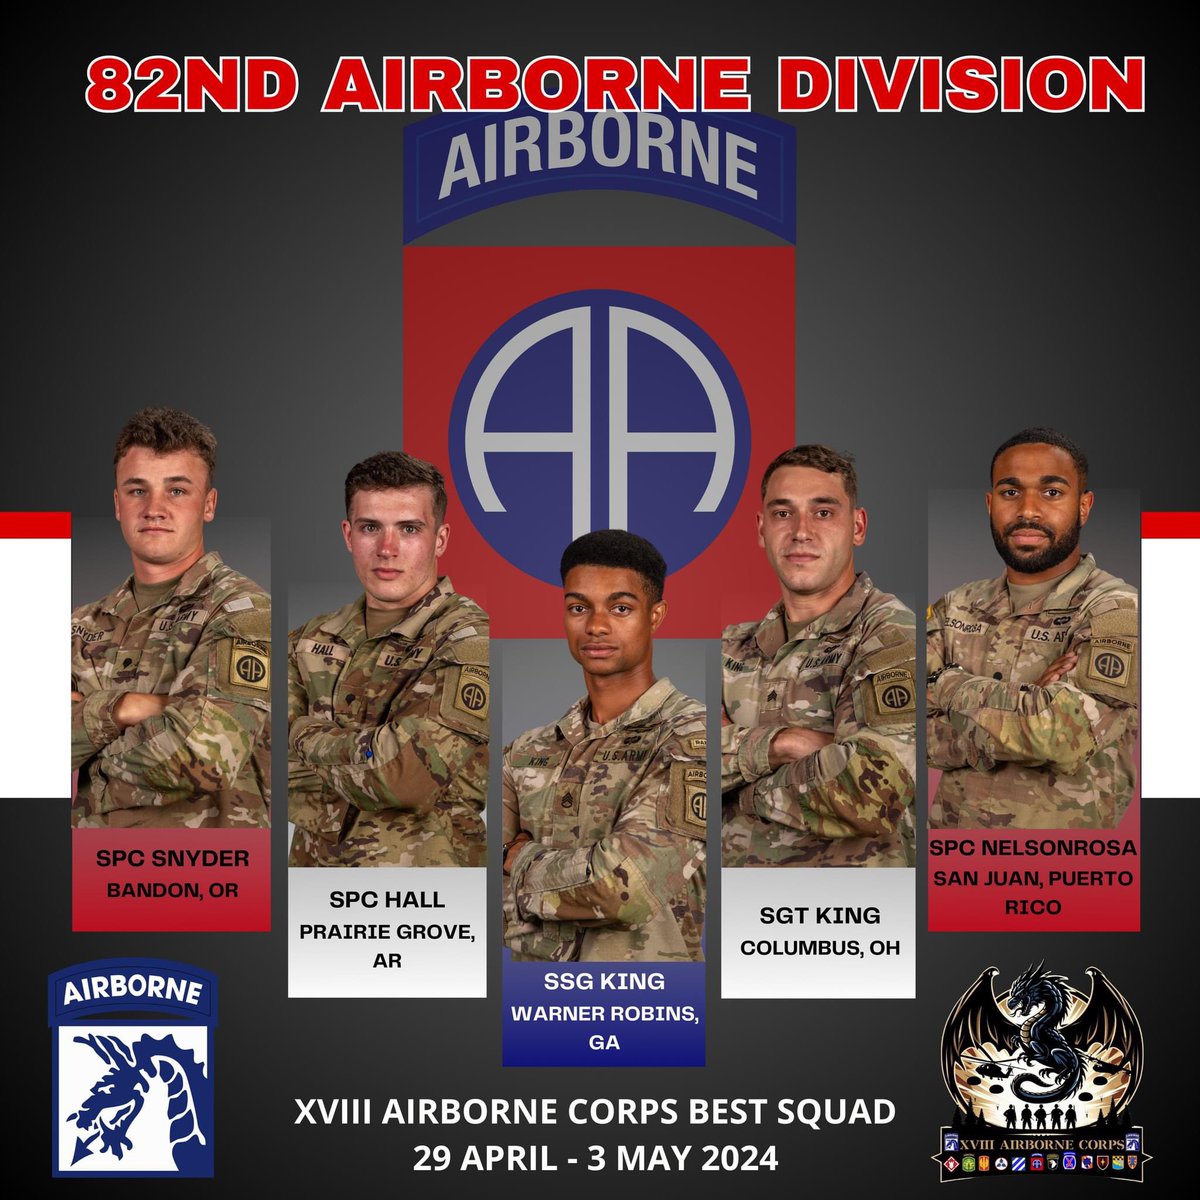 Our Paratroopers will compete in the @18airbornecorps Best Squad Competition this week to earn a spot in the FORSCOM-level competition this summer. Wish them luck as they aim to take the top spot! What is your favorite best-of-rest competition? #AATW #FastFlatAccurateAndLethal